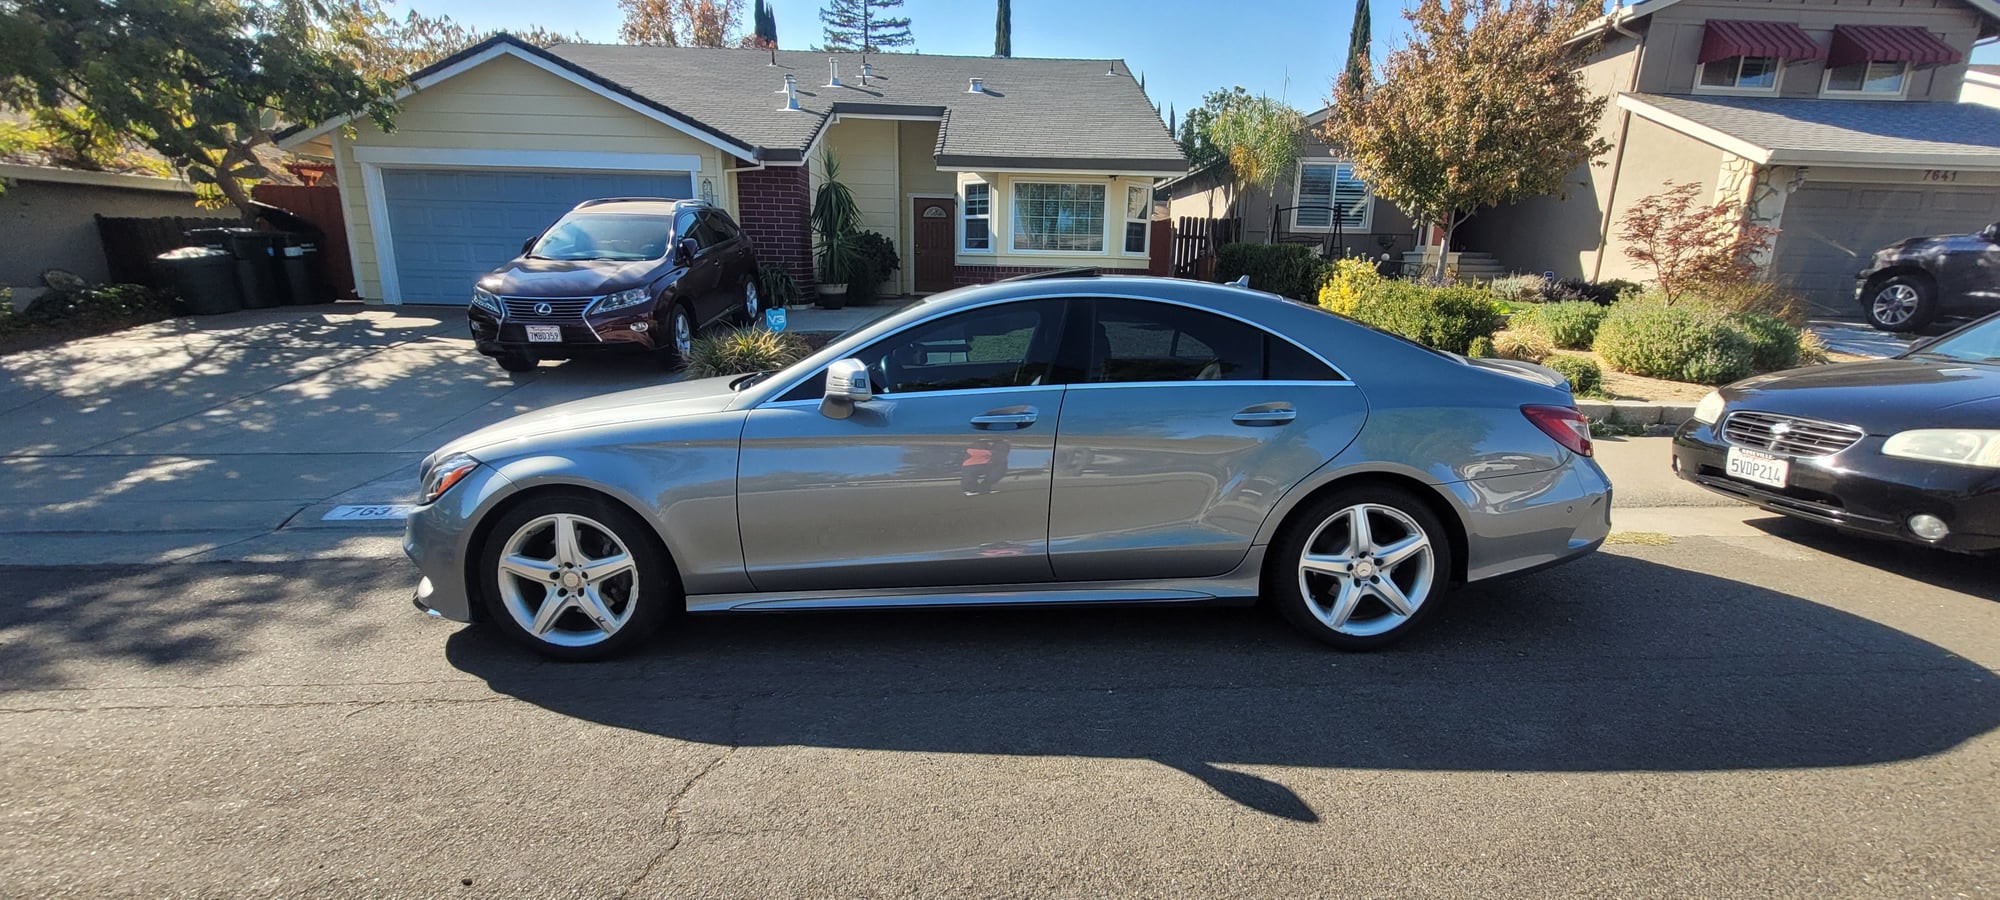 2015 Mercedes-Benz CLS400 - 2015 CLS400 for sale - Used - VIN WDDLJ6FB0FA155503 - 74,000 Miles - 6 cyl - 2WD - Automatic - Sedan - Gray - Carmichael, CA 95608, United States